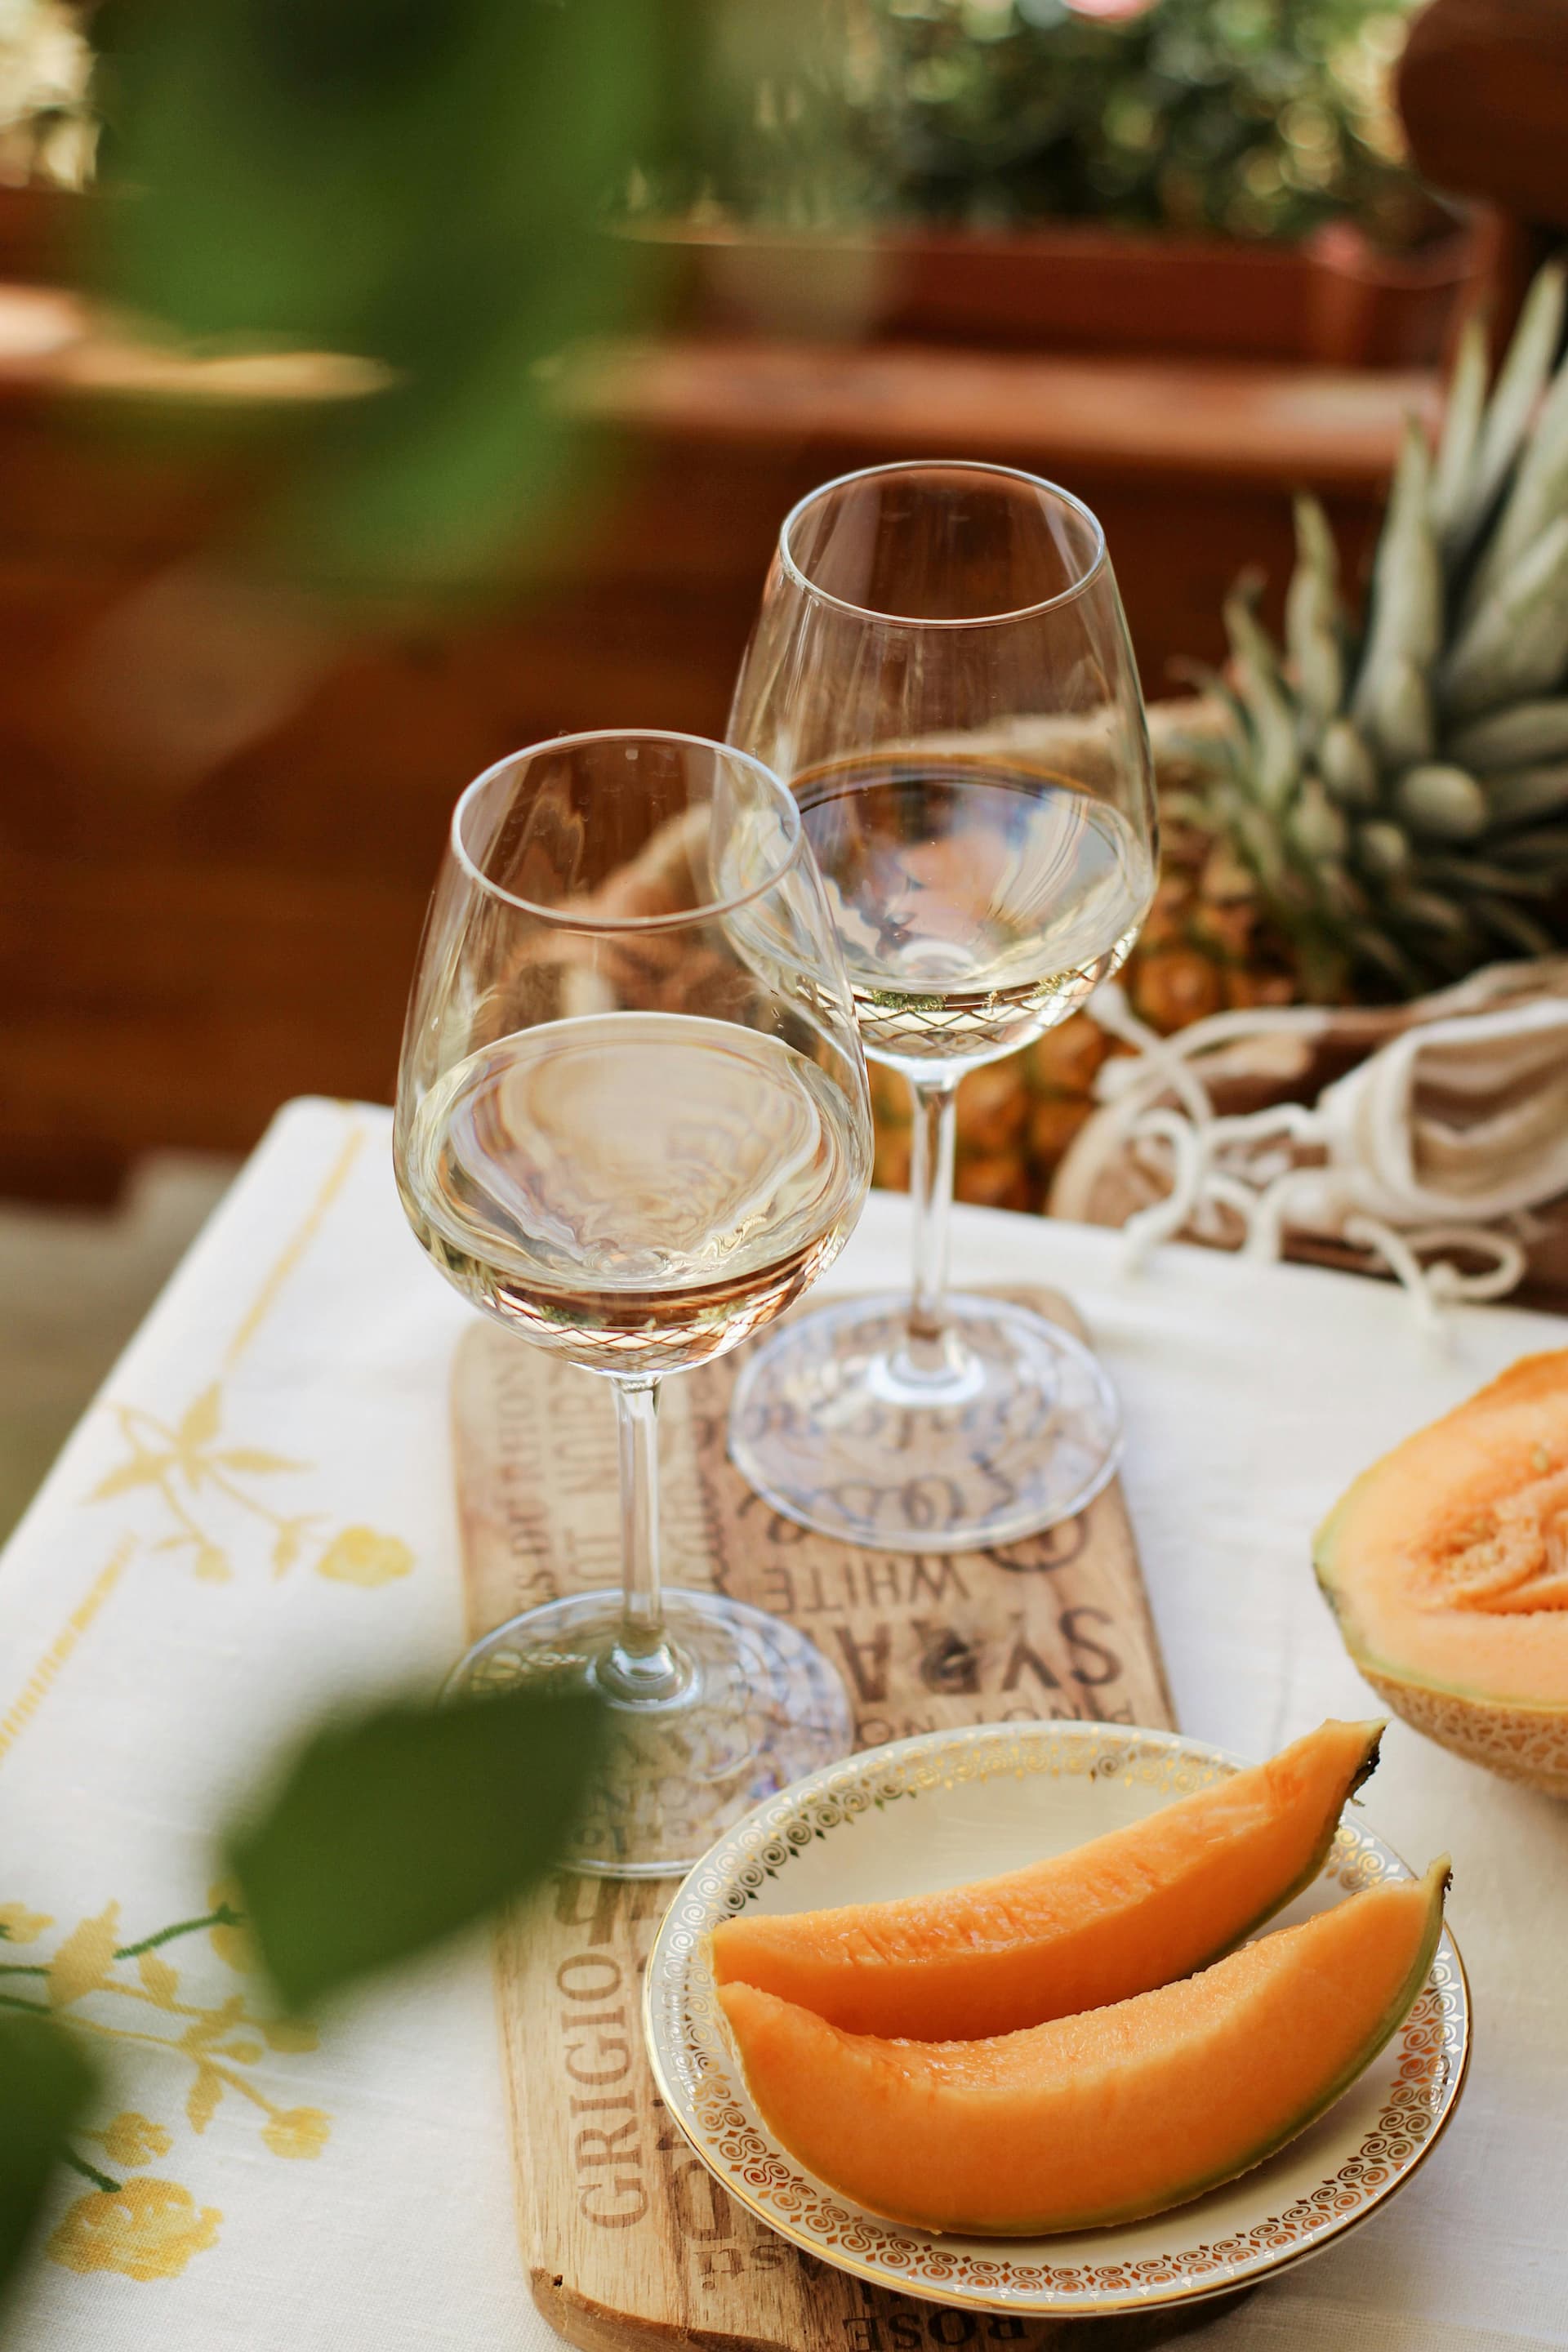 Melon Mania: Refreshing, Iced Cantaloupe And Vodka Spritz For Summer Pool Parties